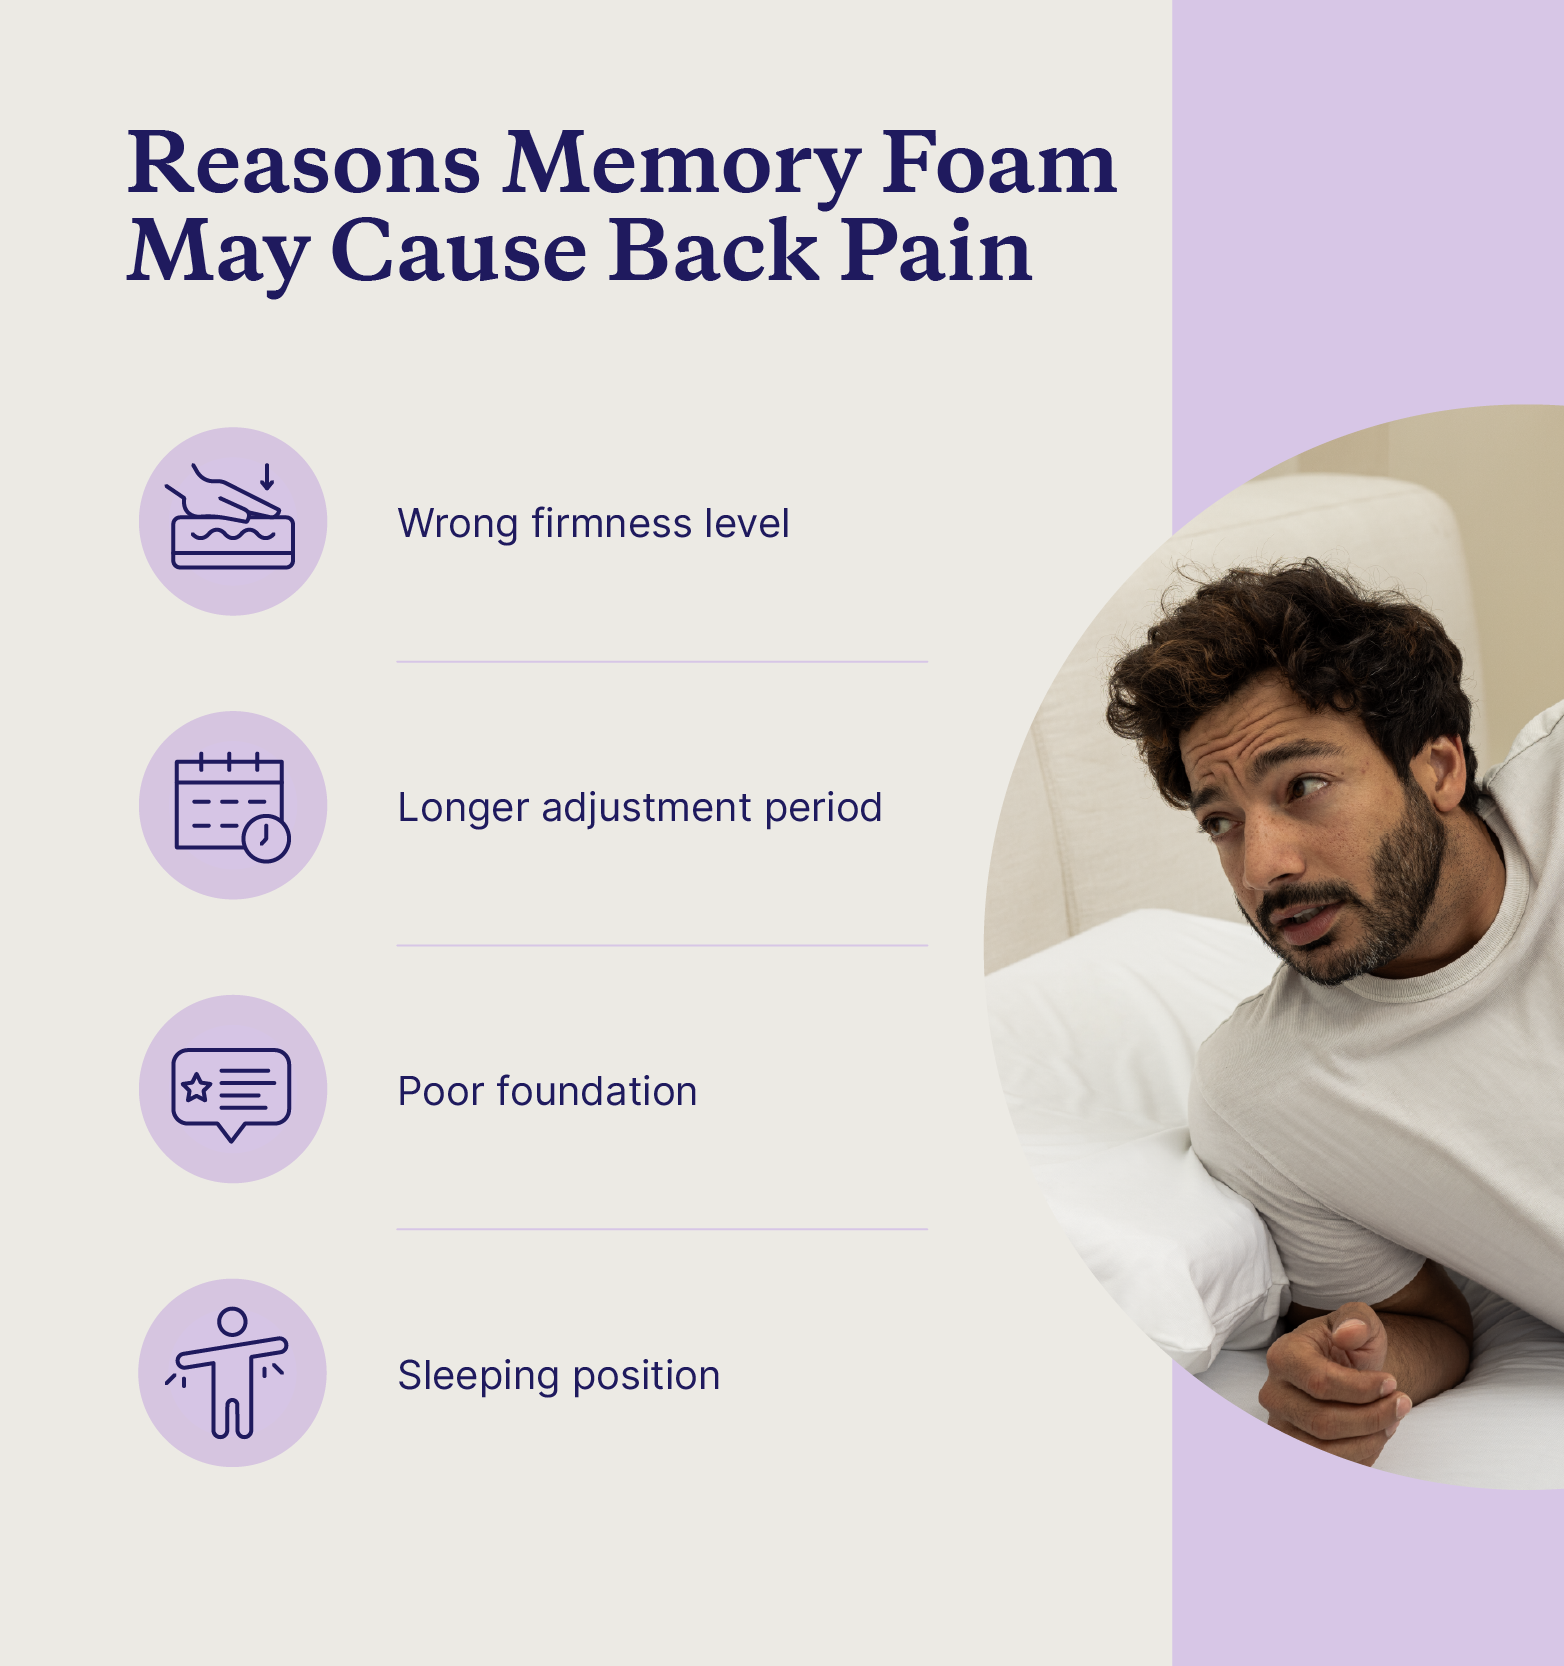 Graphic illustrating how memory foam may cause back pain.